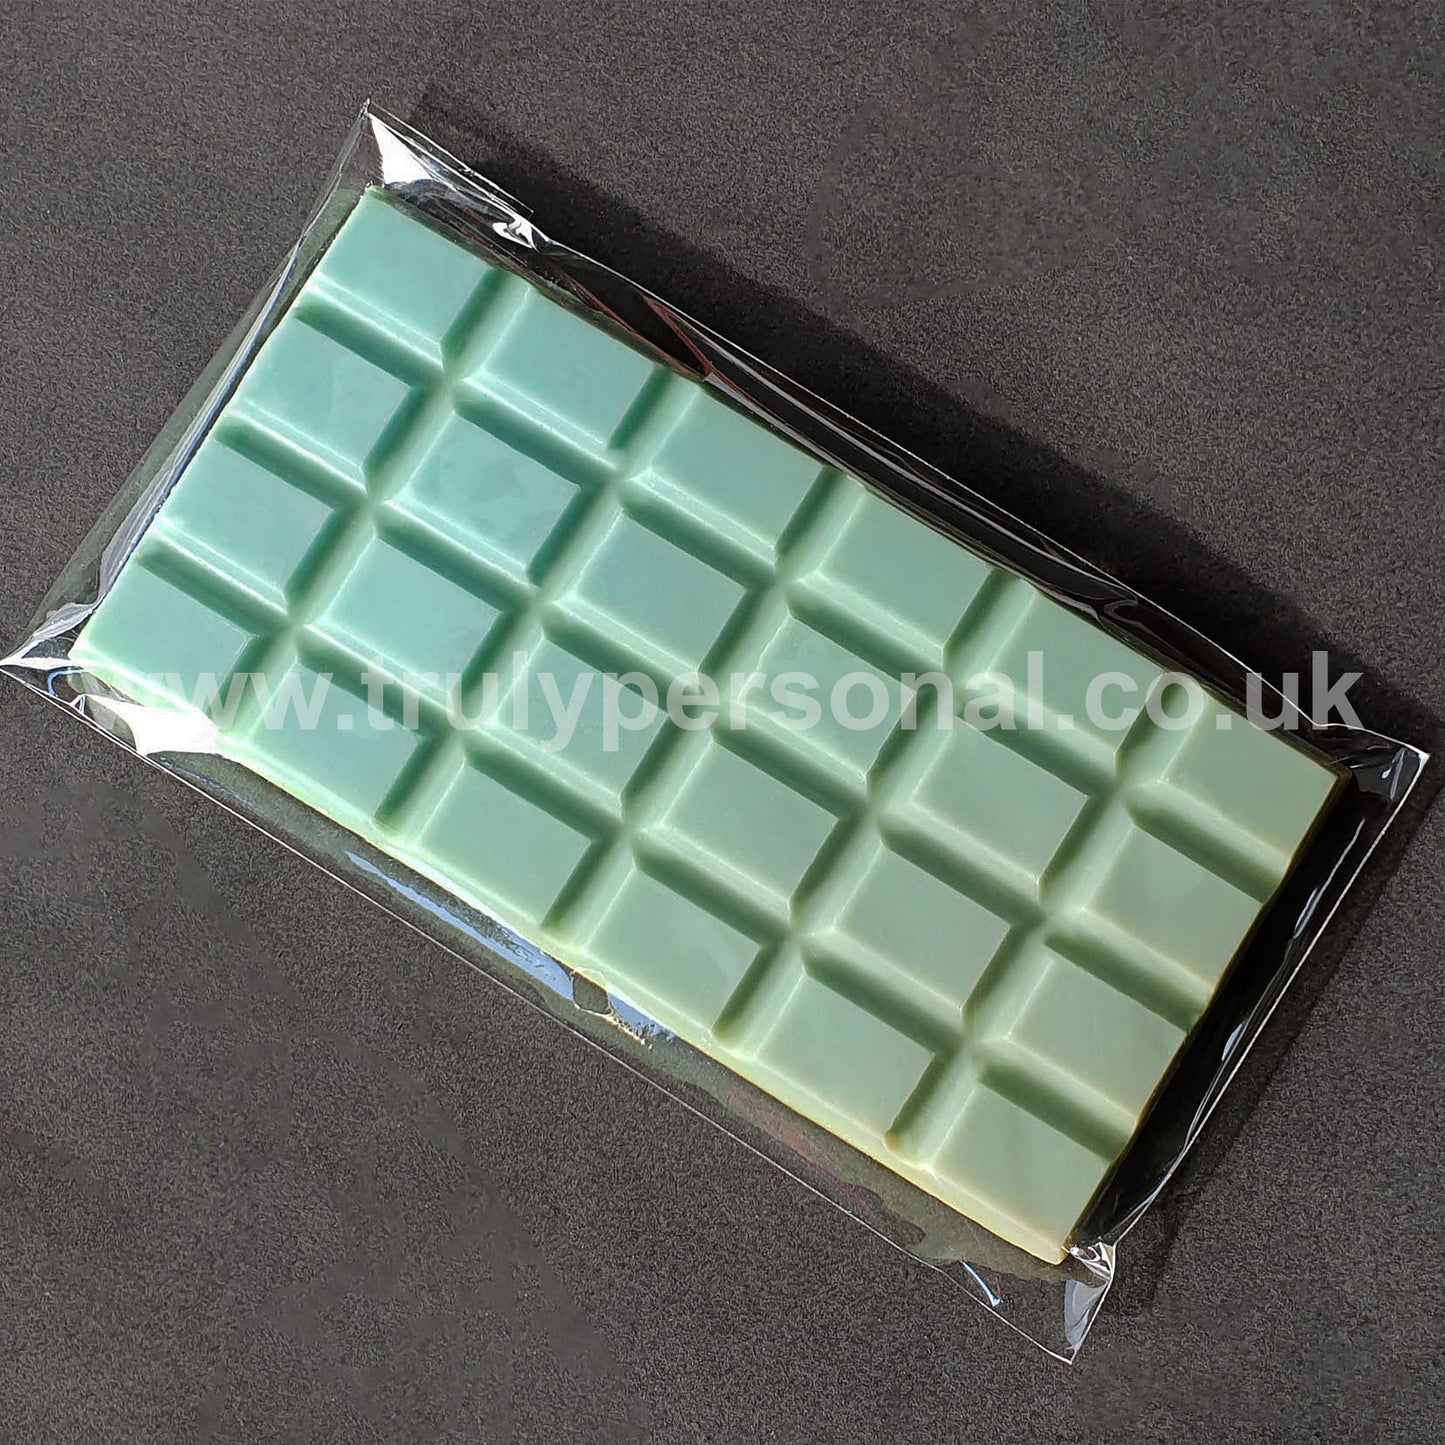 Wax Snap Bar Cello Bags | 90 x 165mm | Truly Personal